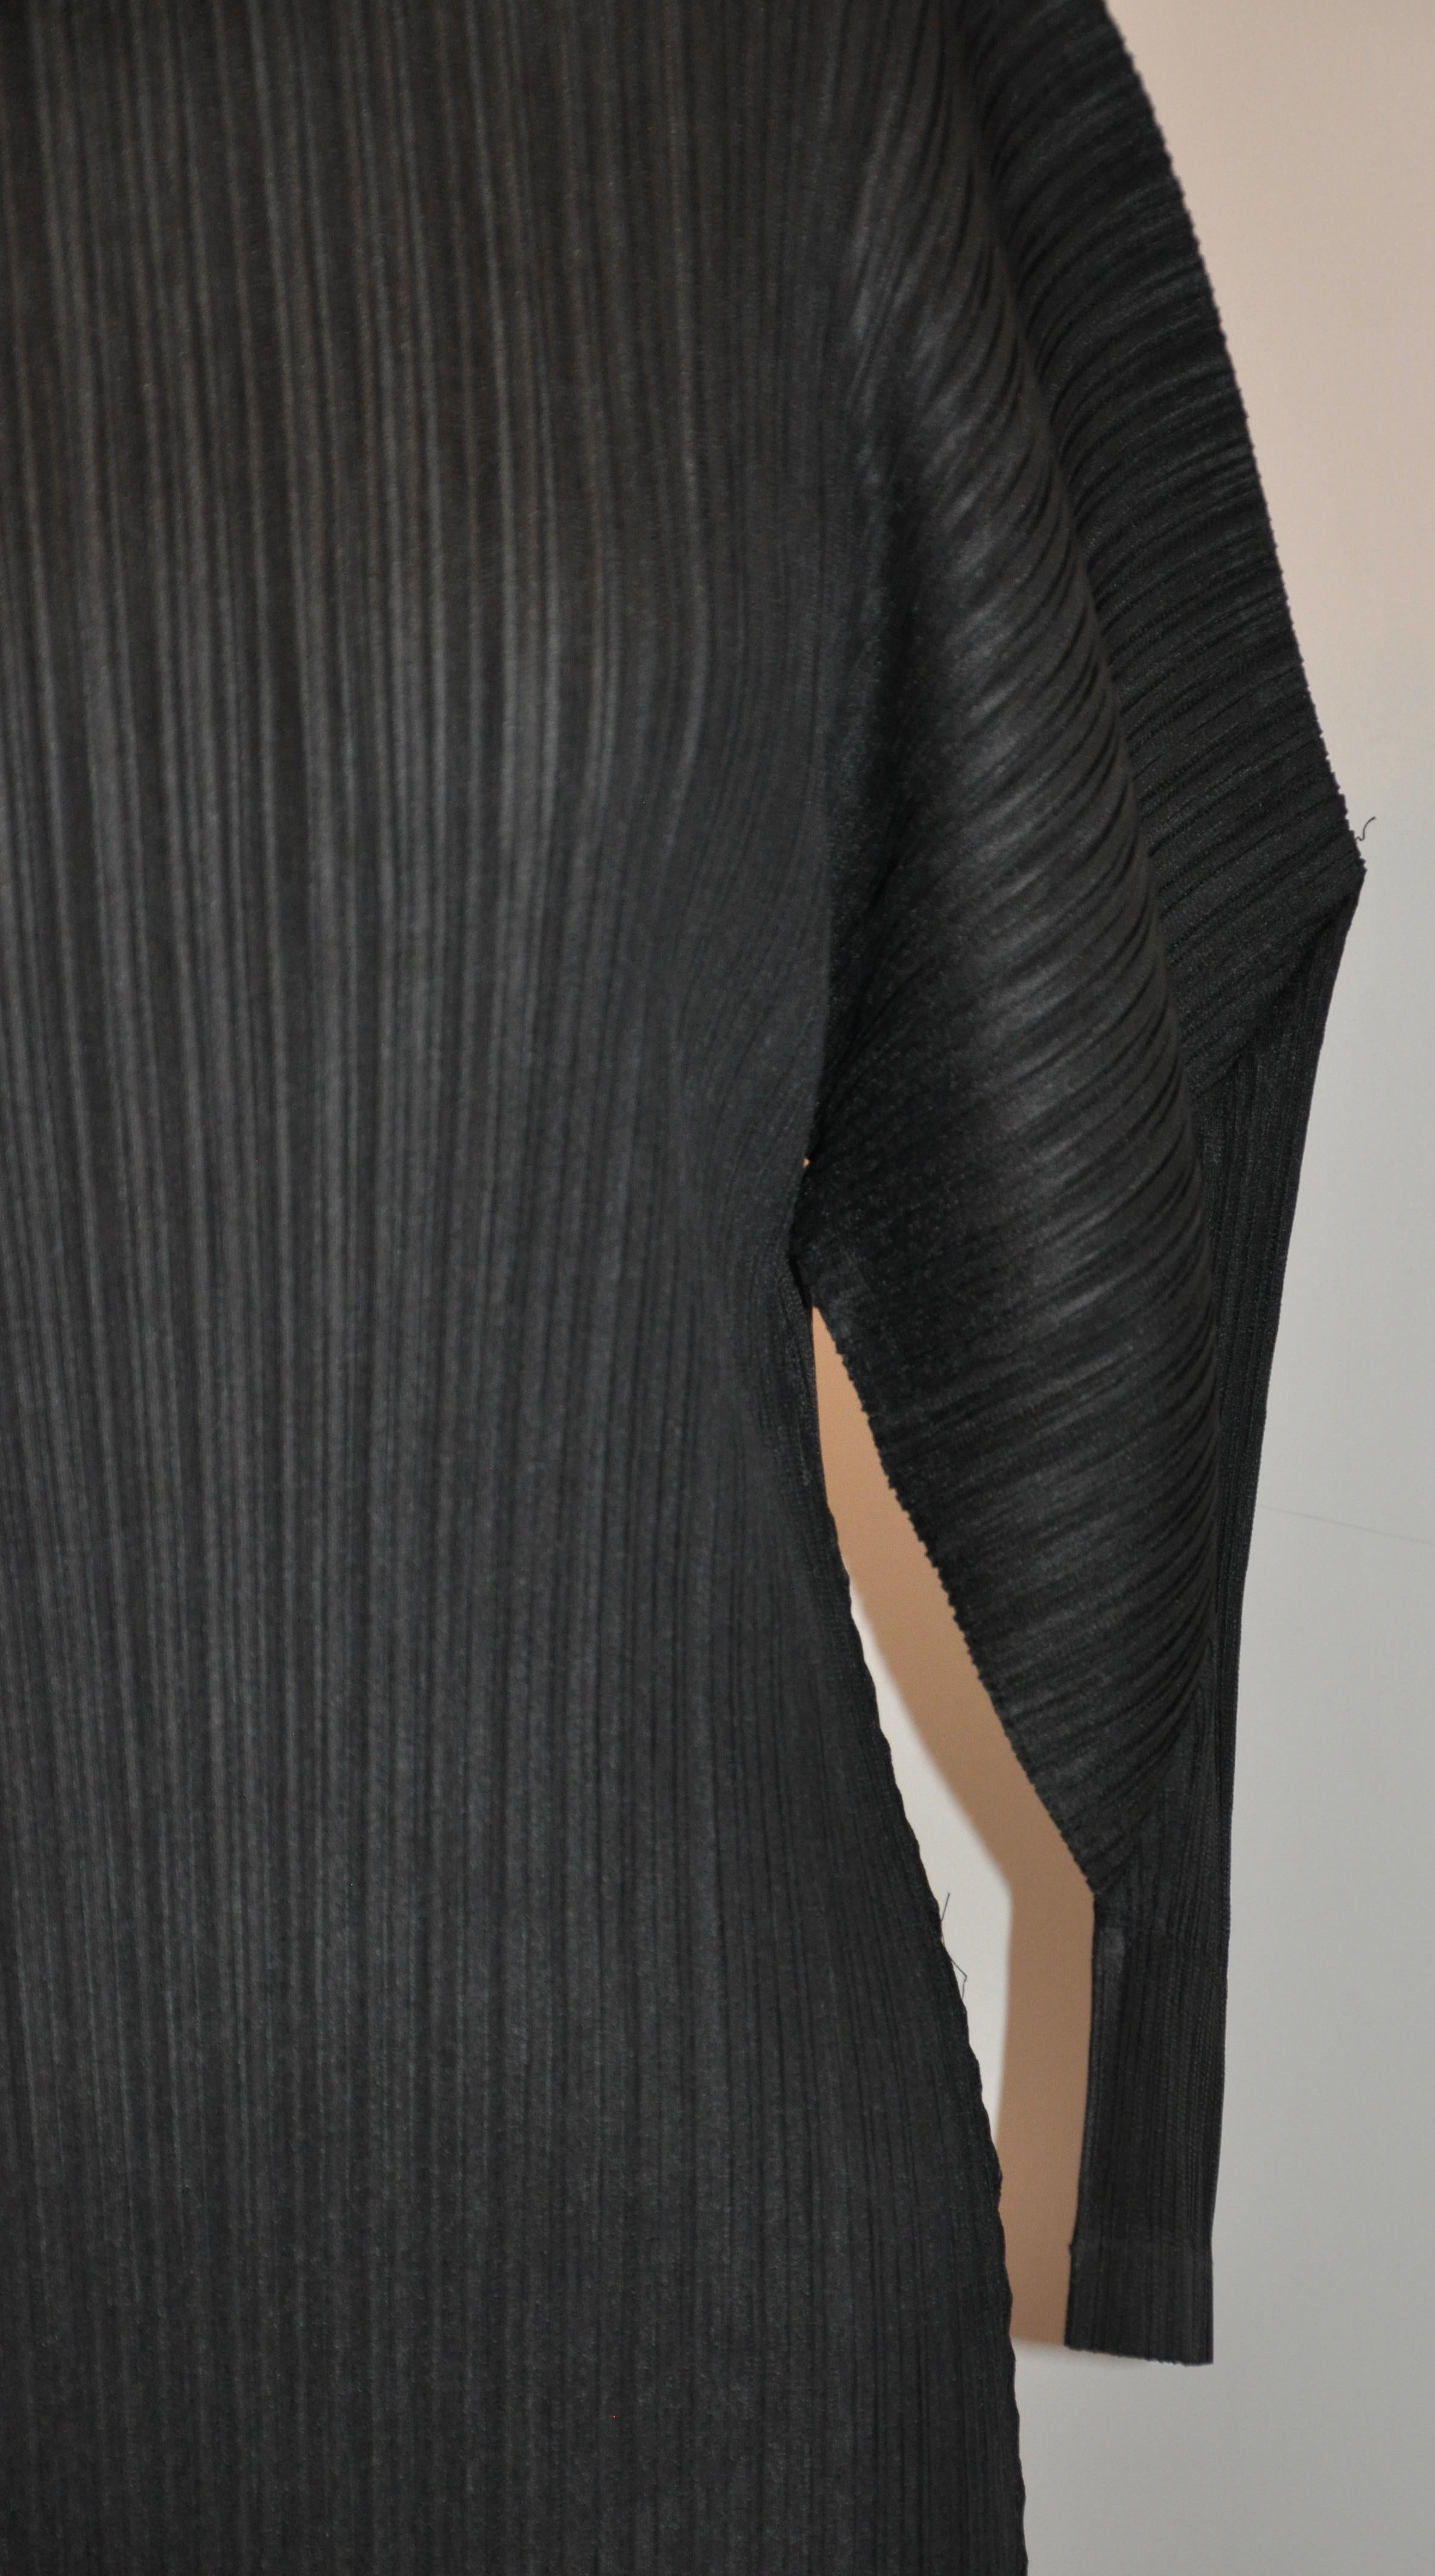 Issey Miyake Iconic Signature Jet-Black High-Neck Pullover Dress For Sale 9